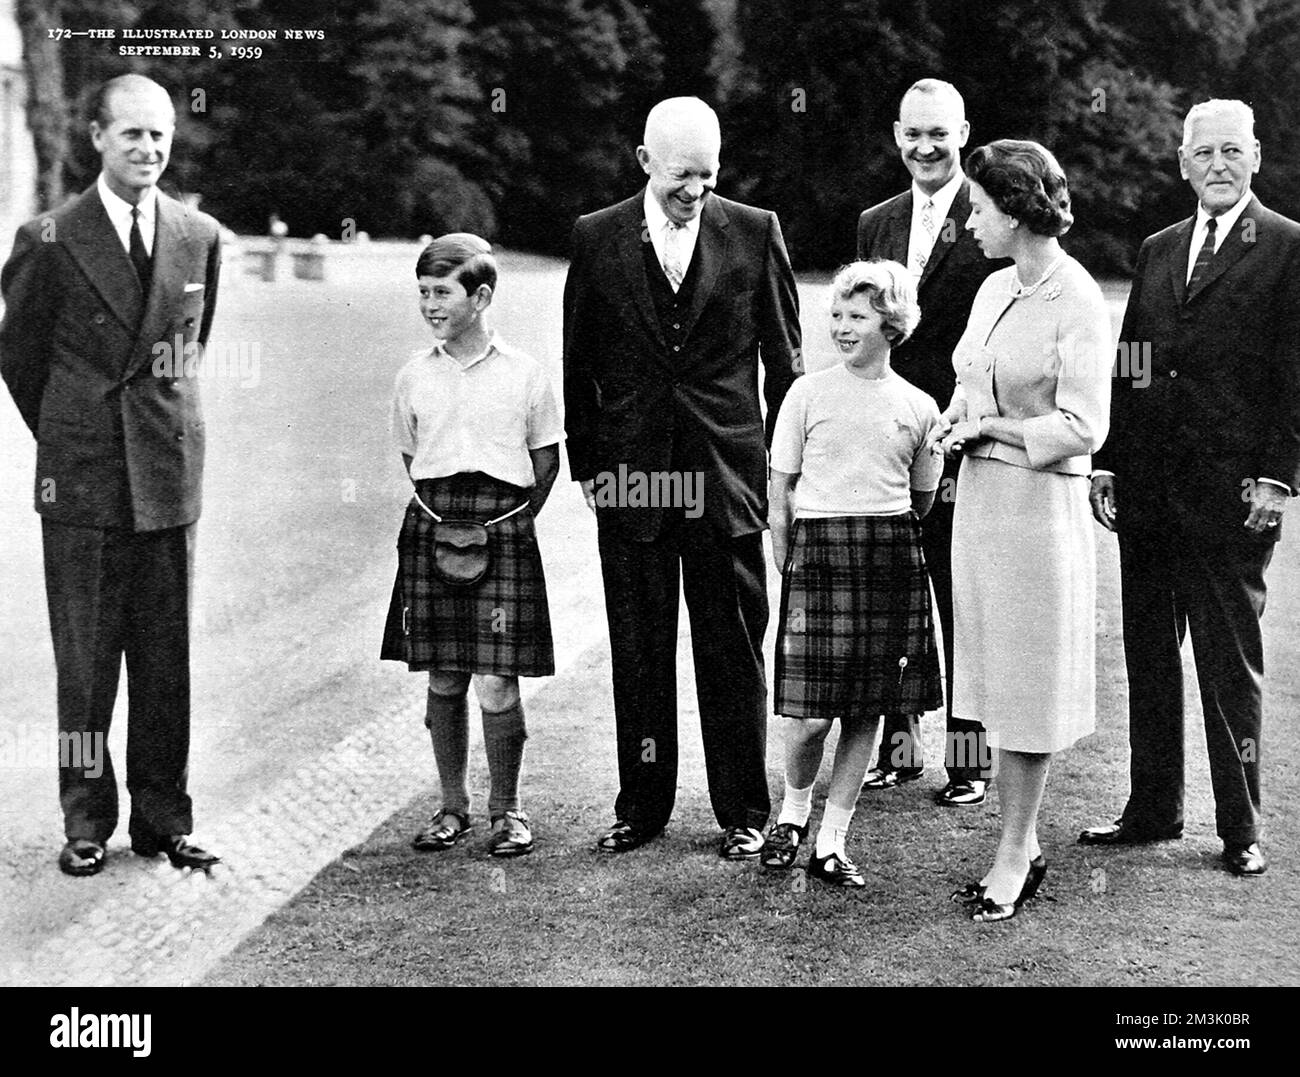 Photograph showing (from left to right): Prince Philip, Prince Charles, Dwight D Eisenhower, Princess Anne, John Eisenhower and Queen Elizabeth II, on the lawn of Balmoral Castle, August 1959.     Date: 1959 Stock Photo